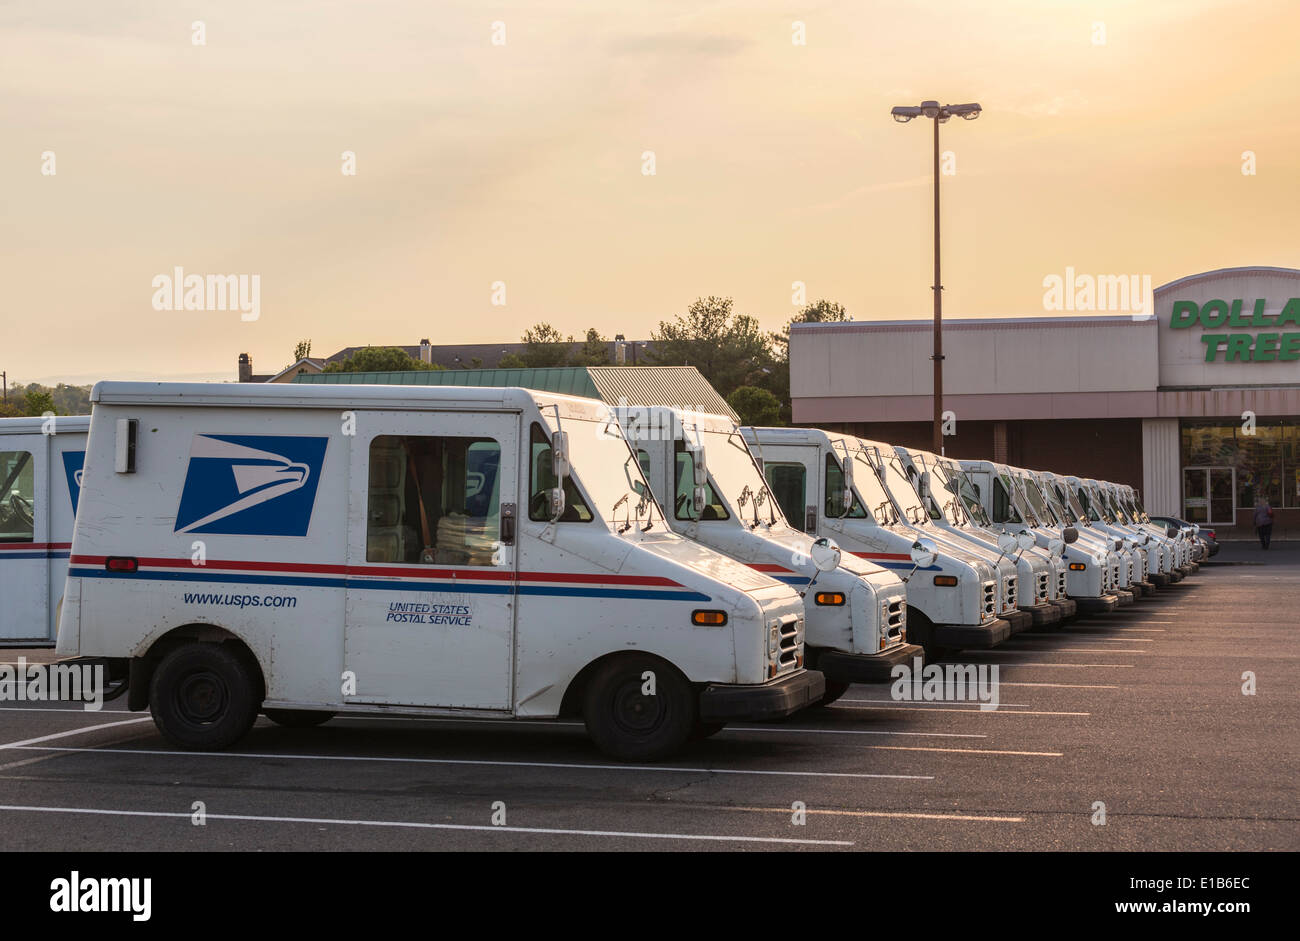 United States Postal Service USPS vans lined up in suburban parking lot at dusk ready for next day deliveries Stock Photo